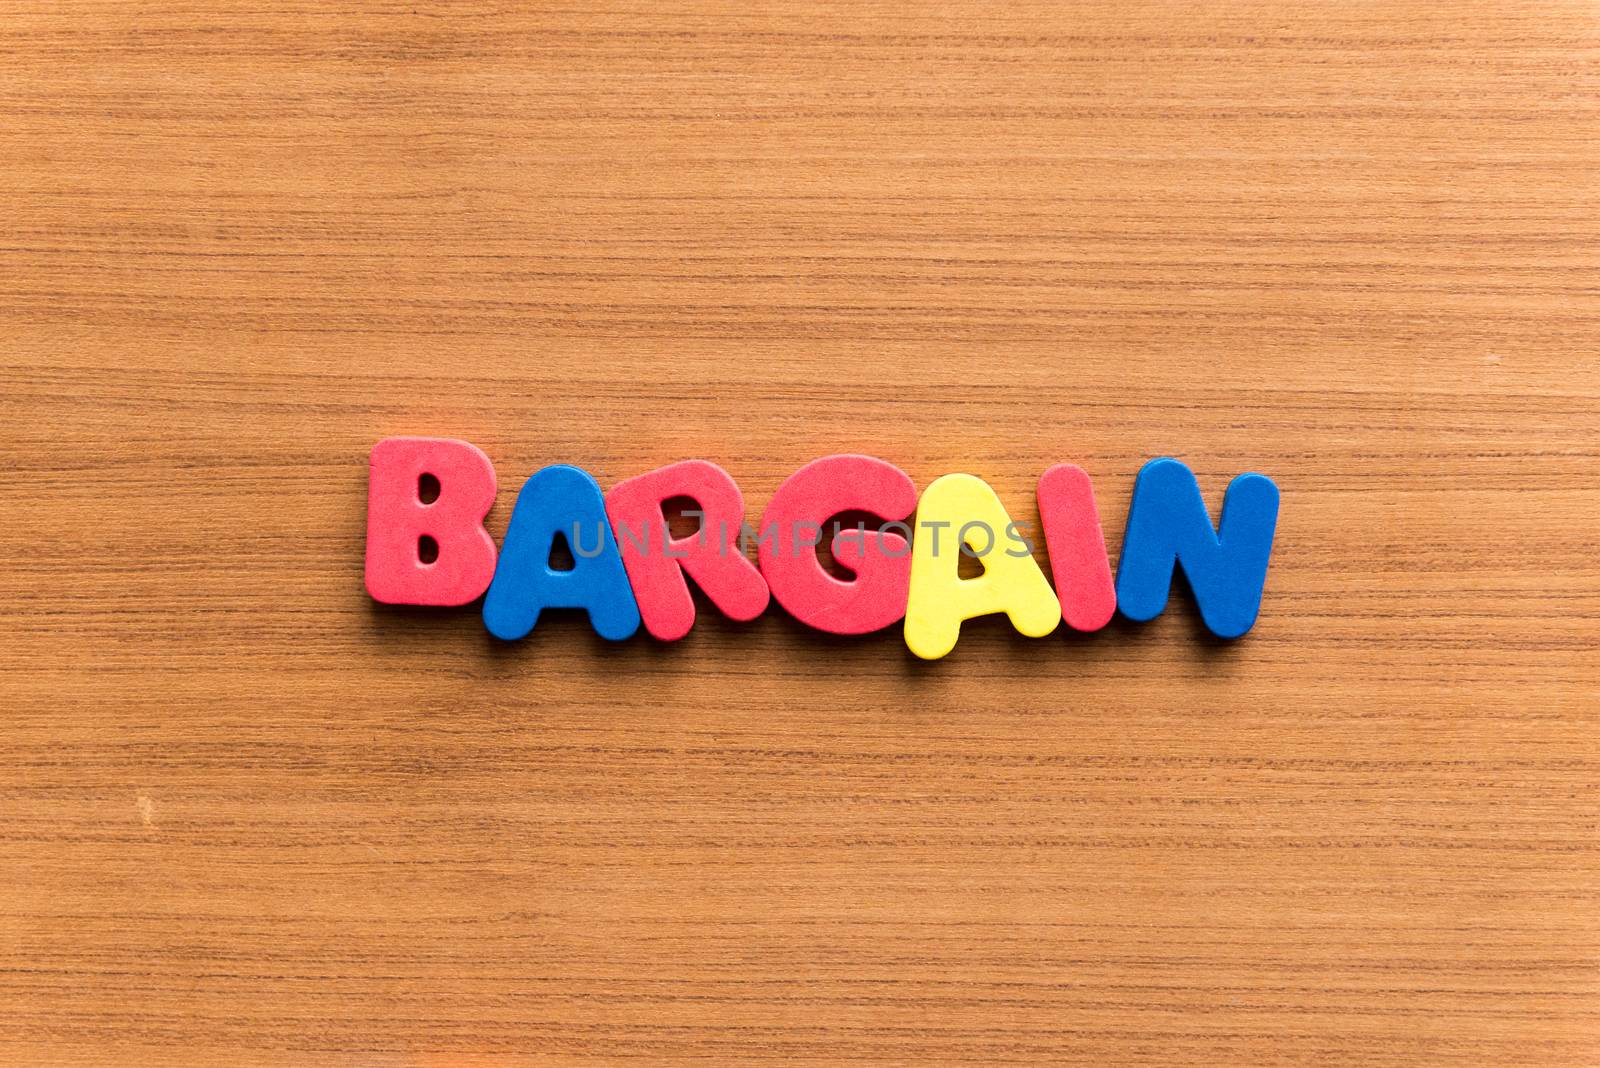 bargain colorful word on the wooden background